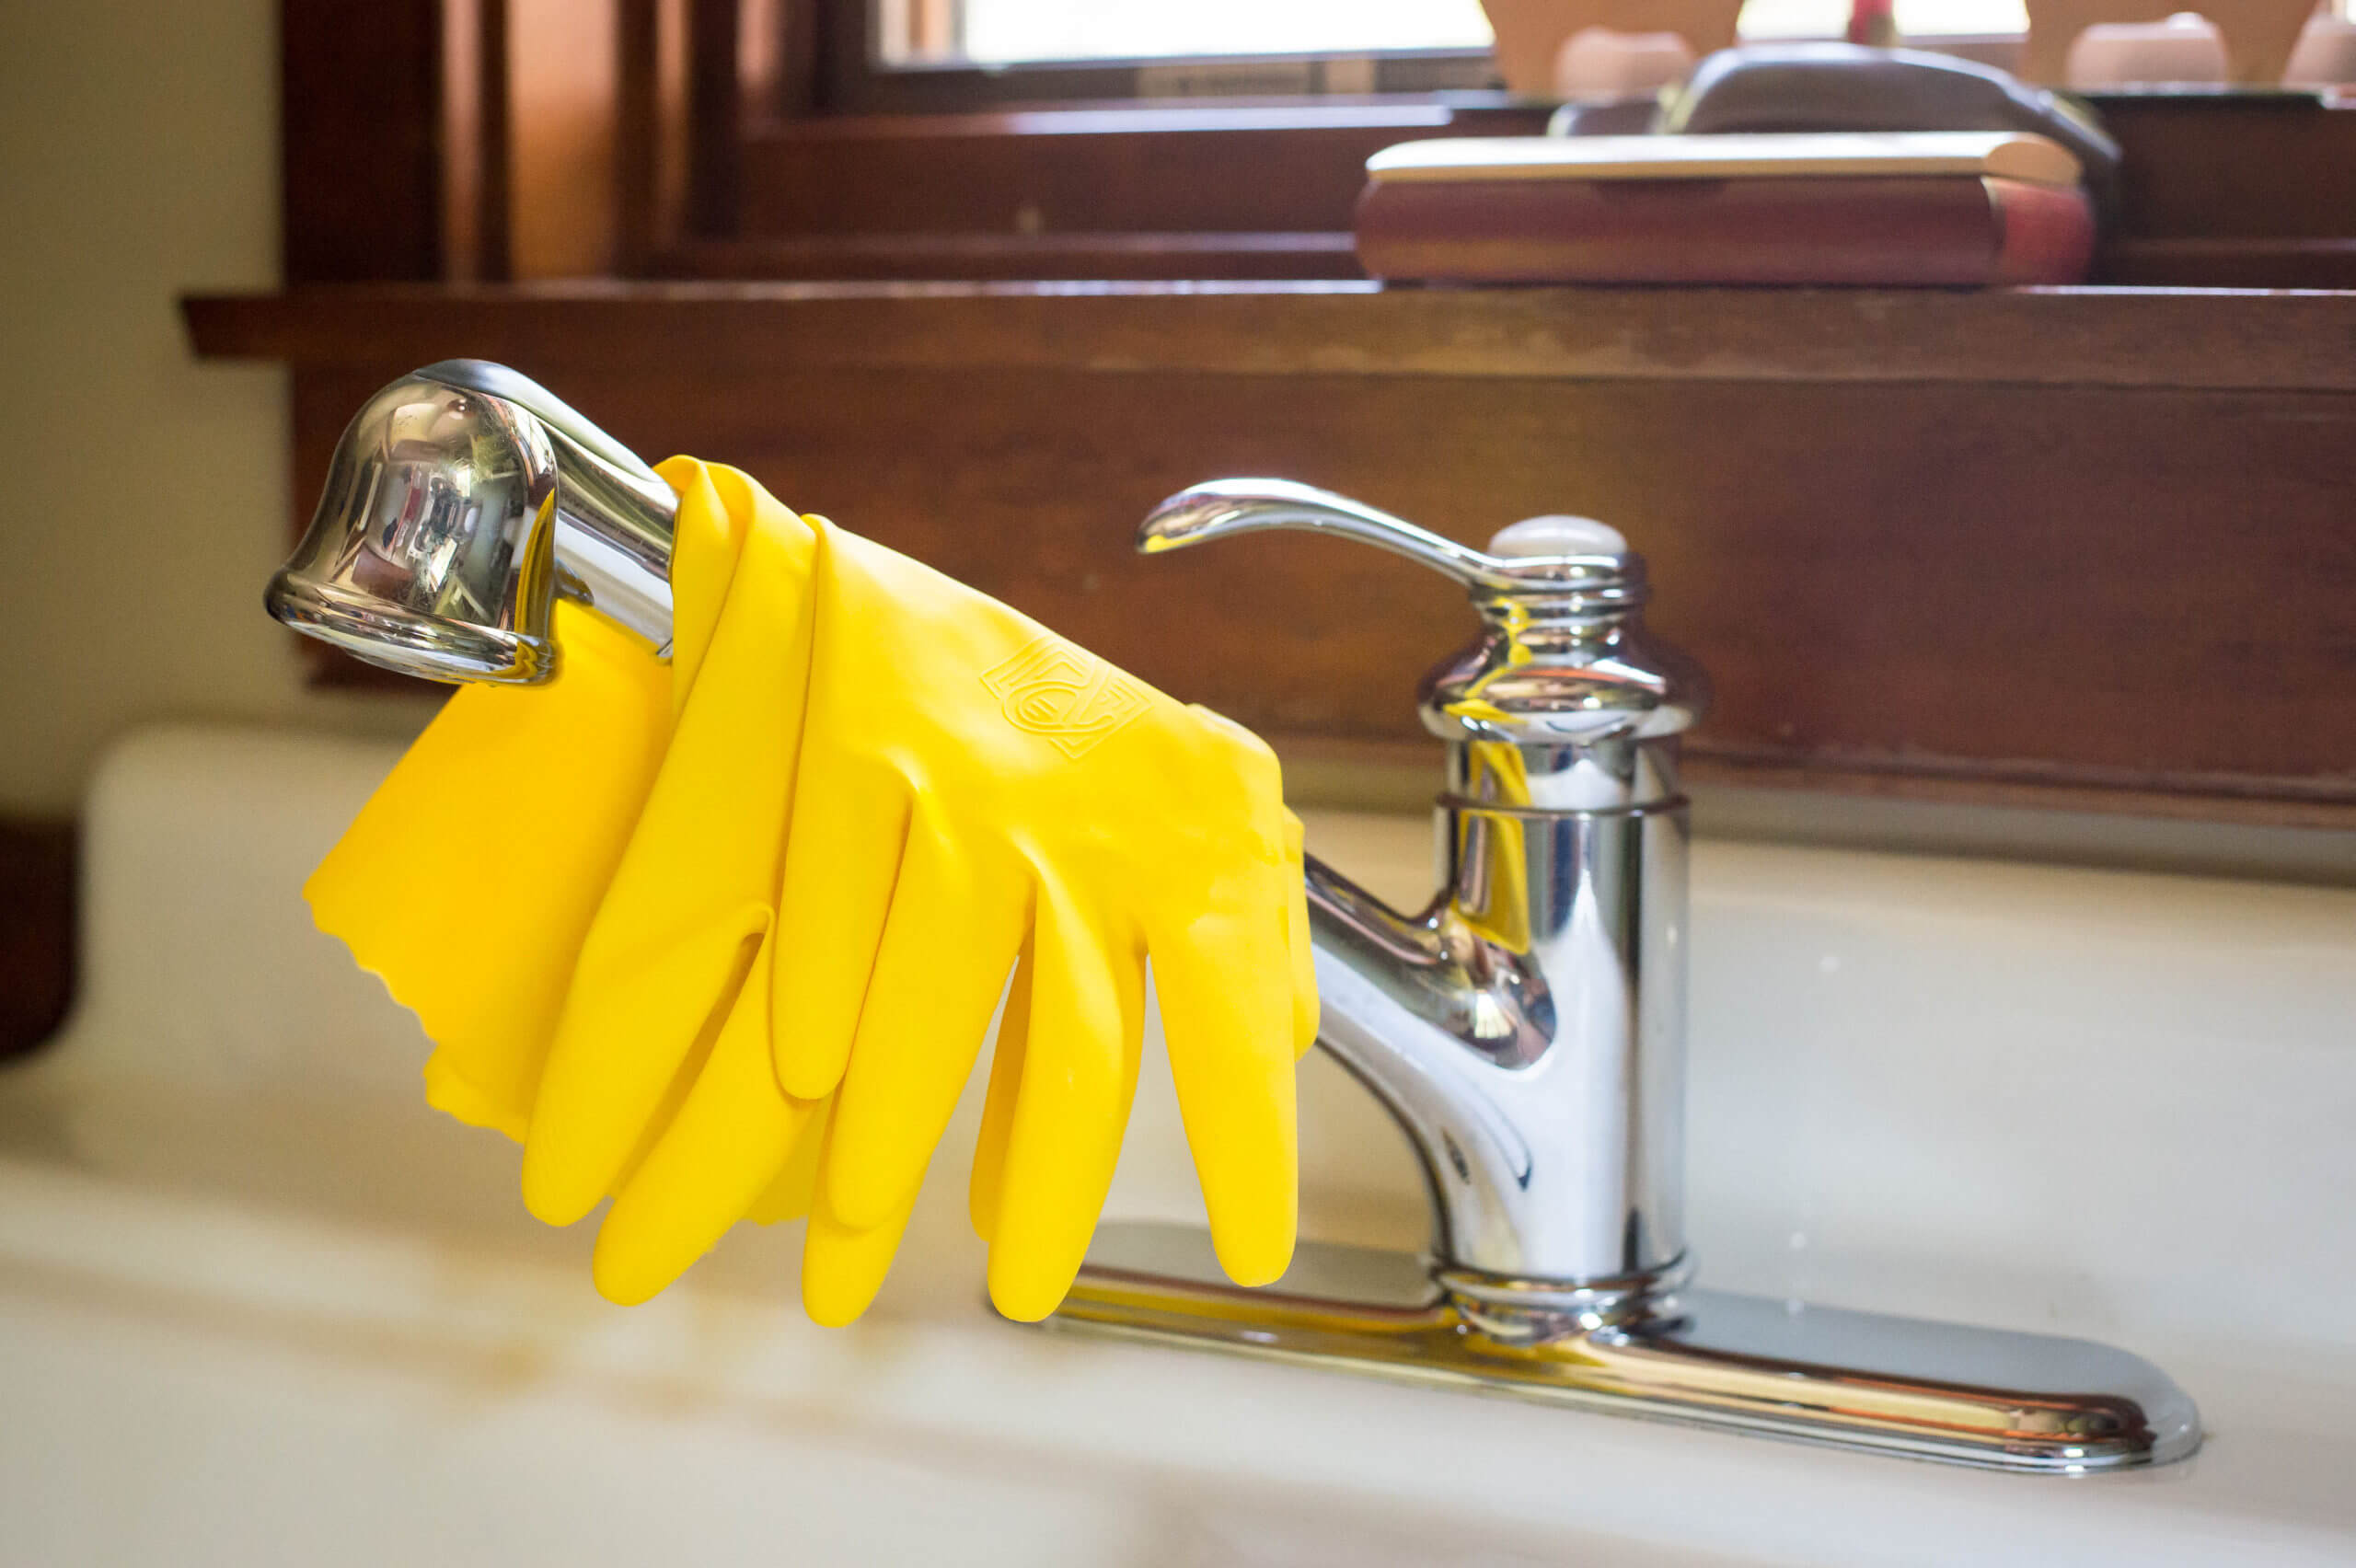 Cleaning gloves are folded over the faucet of a kitchen sink.